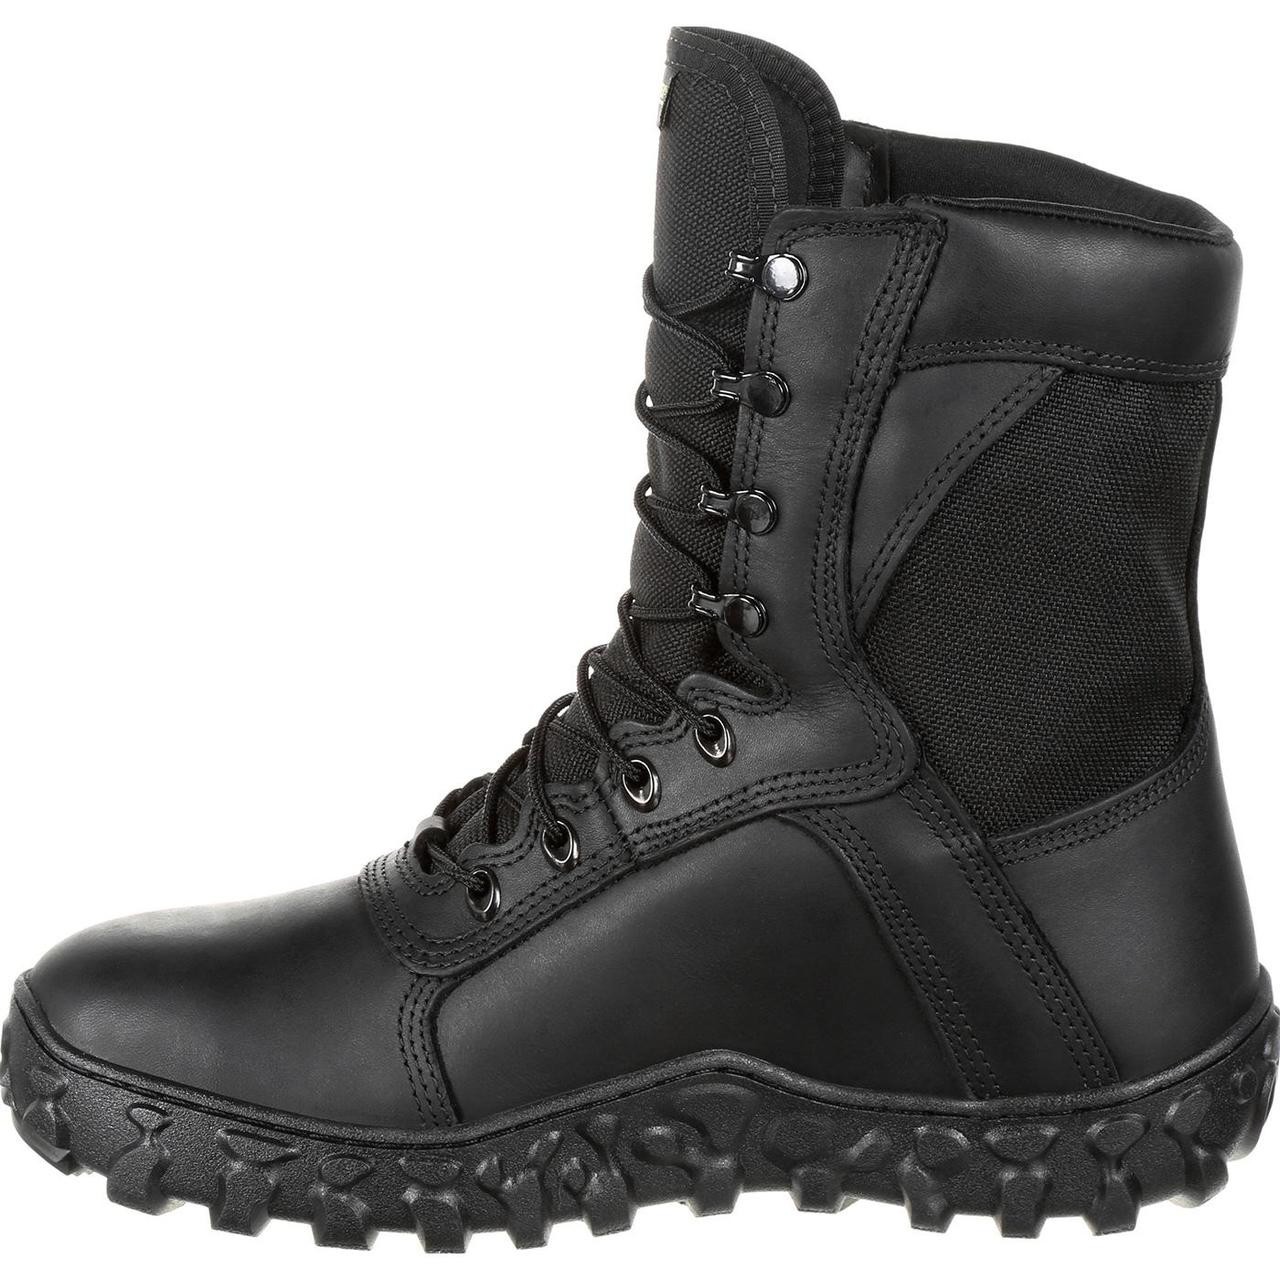 Rocky S2V Flight Boot 600G Insulated Gore-tex Boot Black USA Made